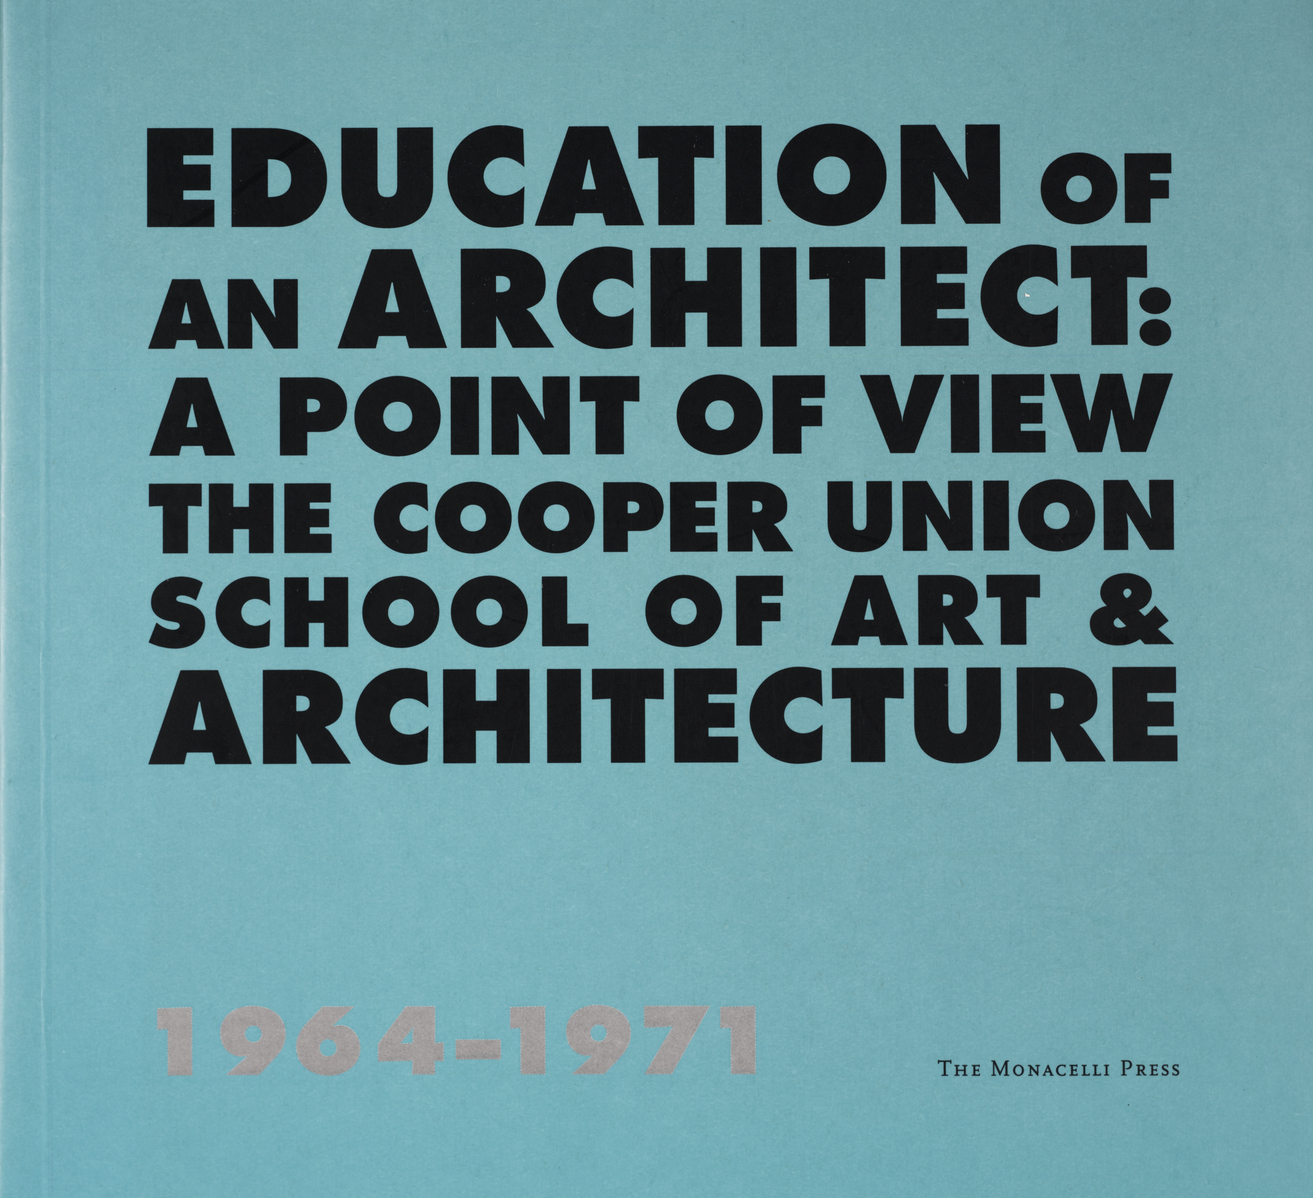 Education of an Architect: A Point of View. The Cooper Union School of Art & Architecture, 1964-71